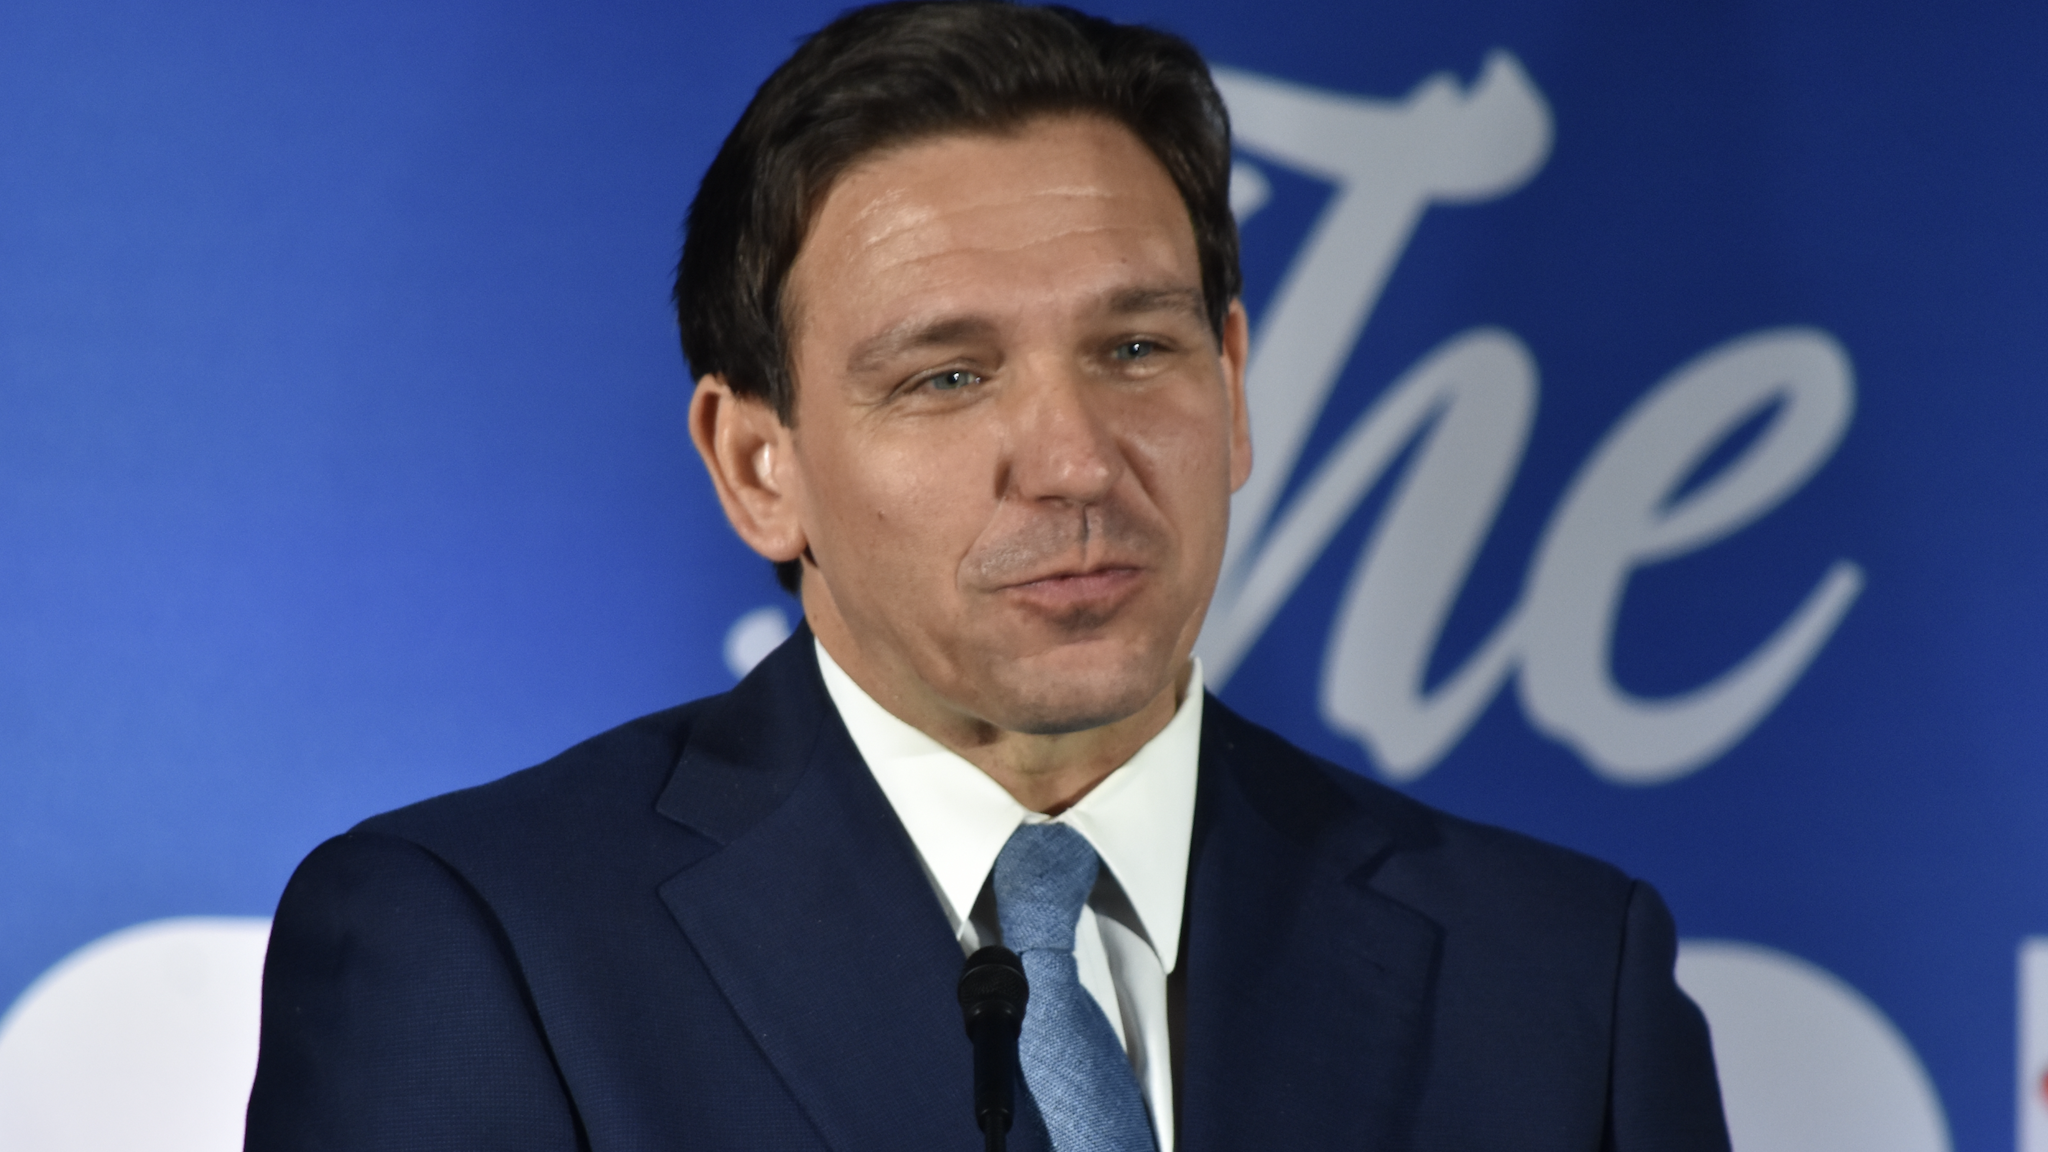 GARDEN CITY, NEW YORK, UNITED STATES - APRIL 1: Florida Governor Ron DeSantis speaks during 'The Florida Blueprint' event on Long Island, New York, United States on April 1, 2023. Ron DeSantis made comments on the Grand Jury's indictment of Donald J. Trump, 45th President of the United States in Manhattan, New York.